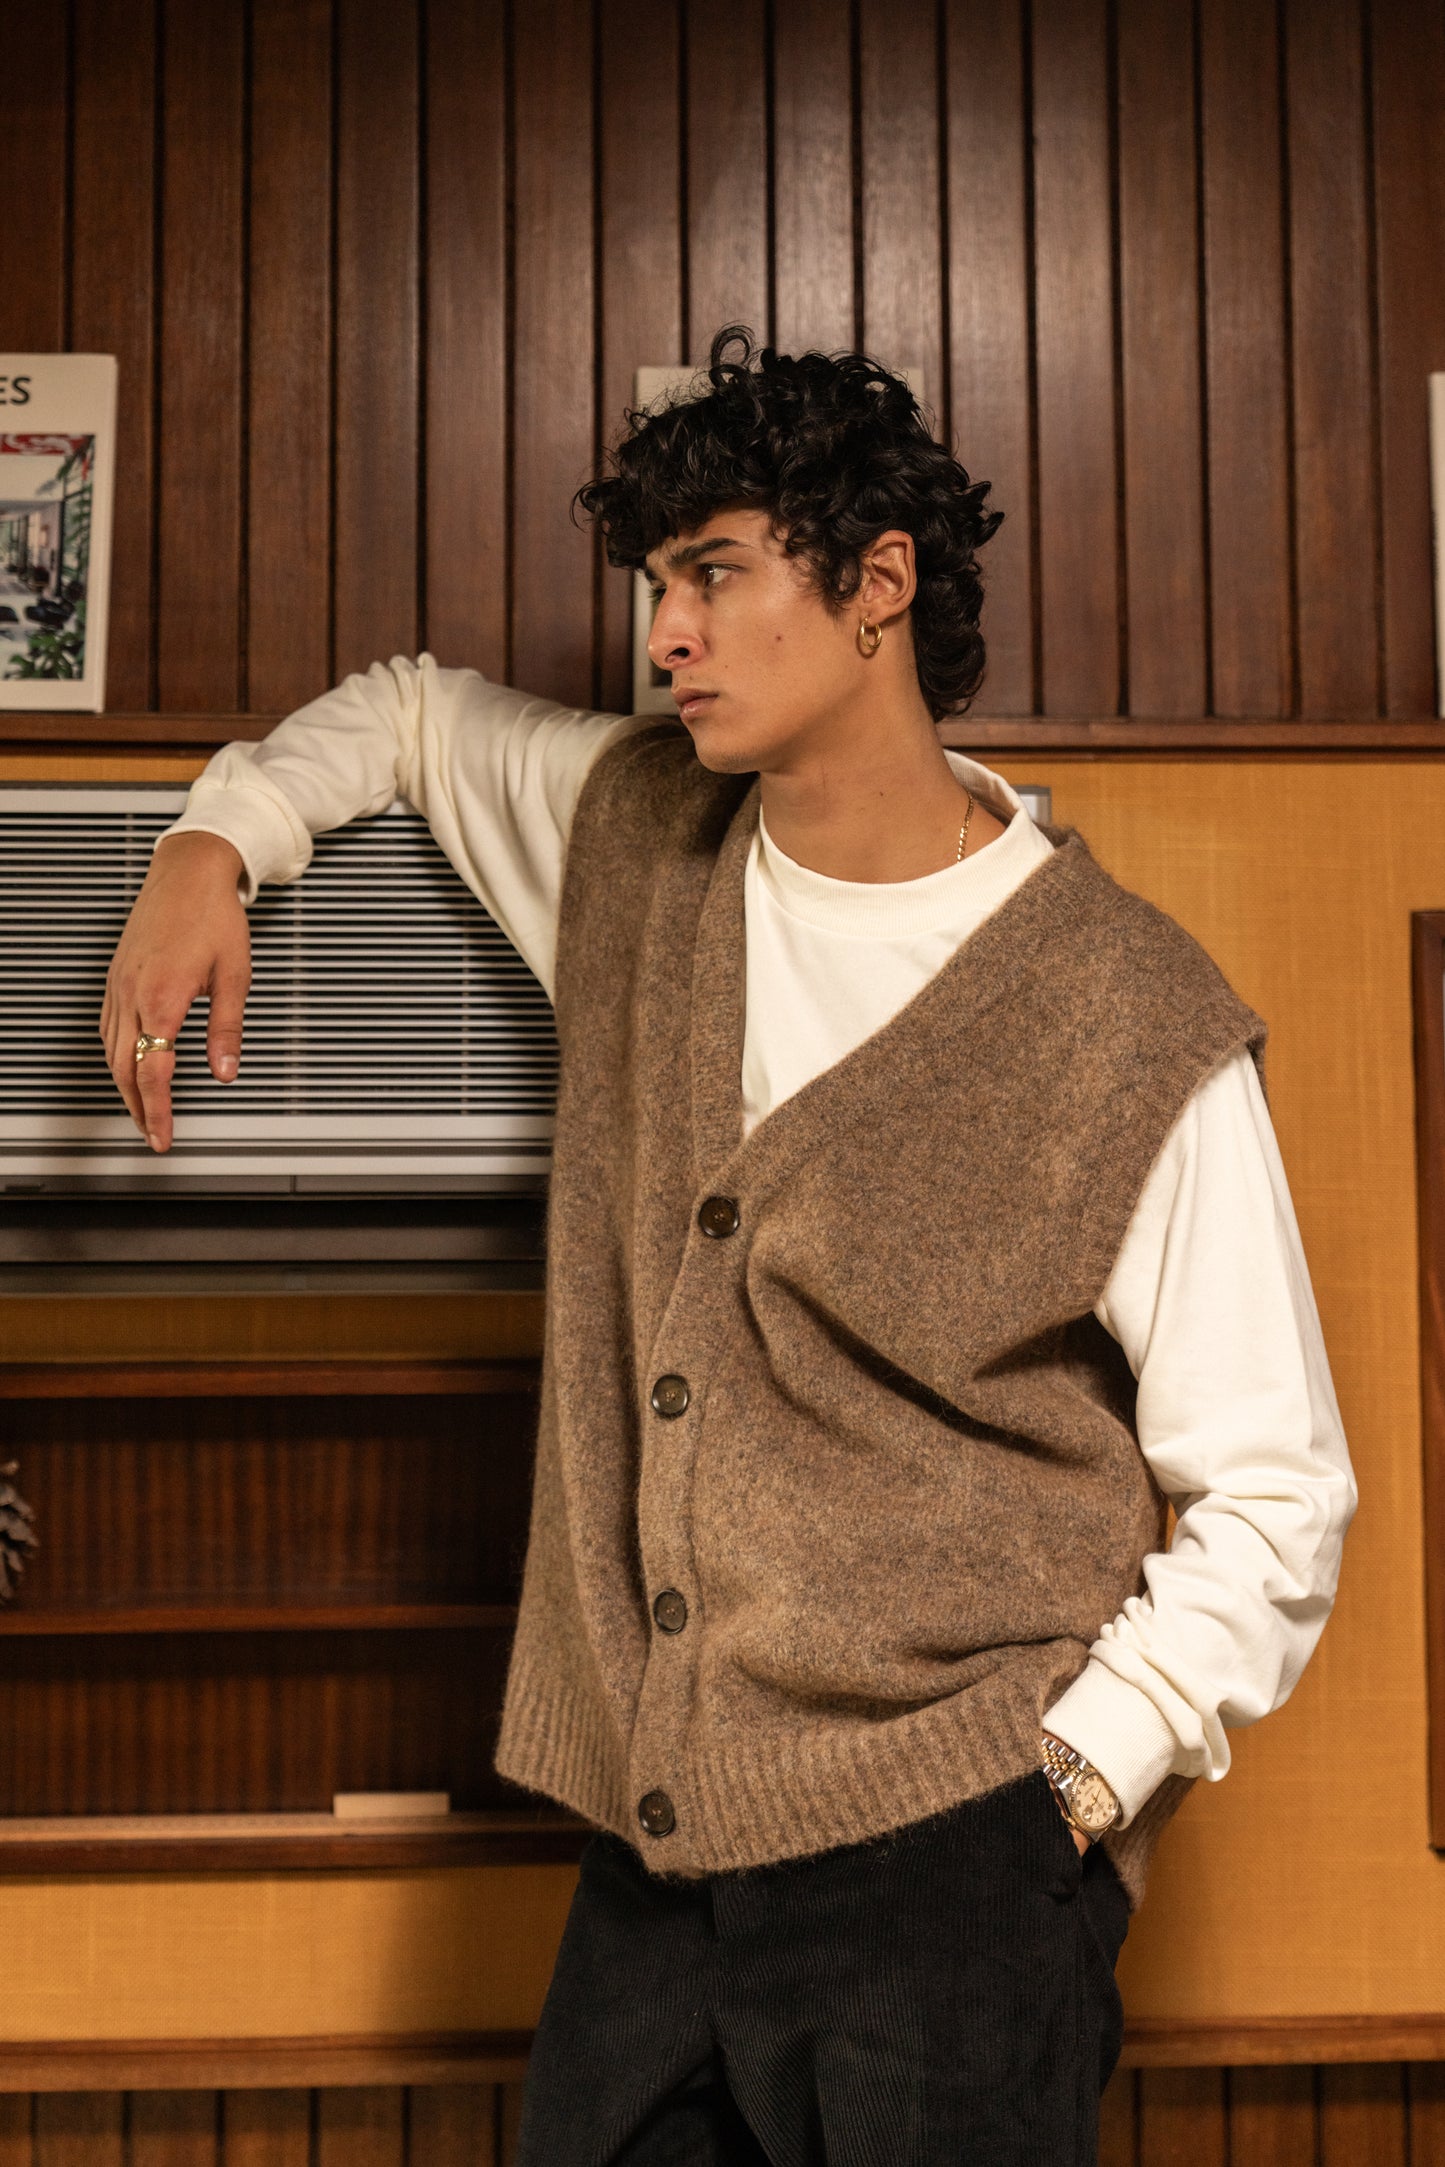 HUDSON MOHAIR CARDIGAN VEST - TAUPE BROWN